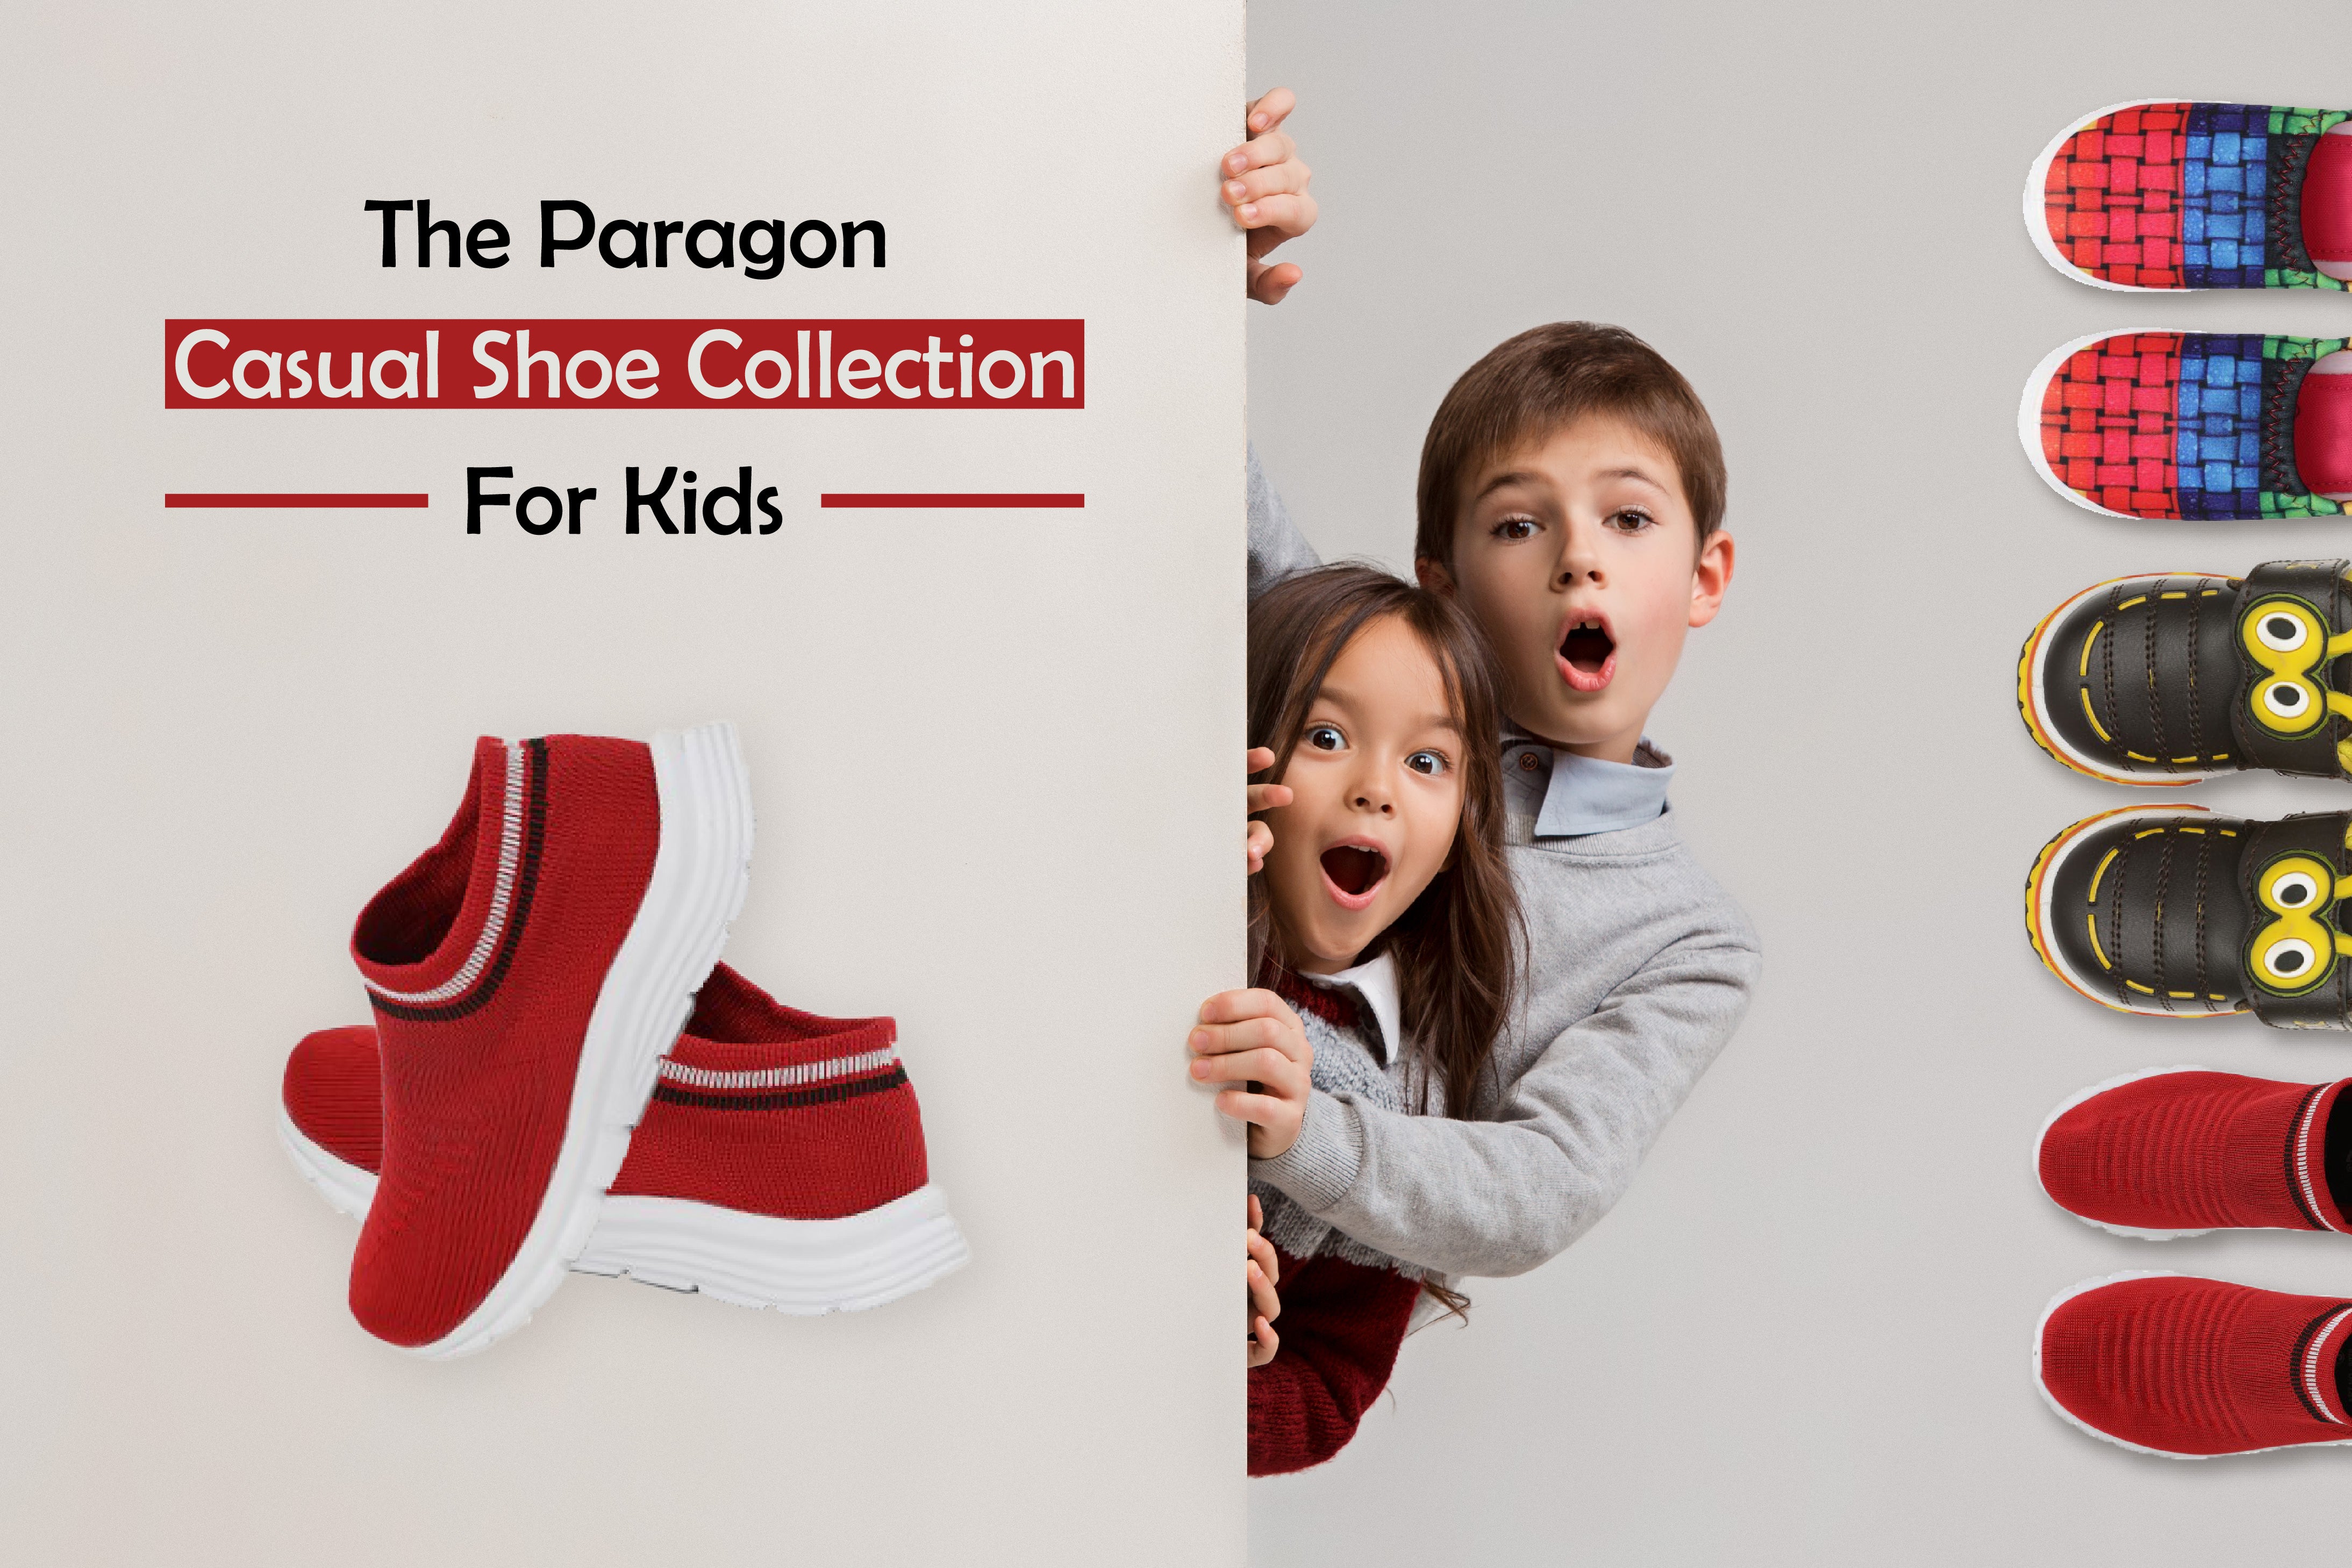 The Paragon Casual Shoe Collection For Kids